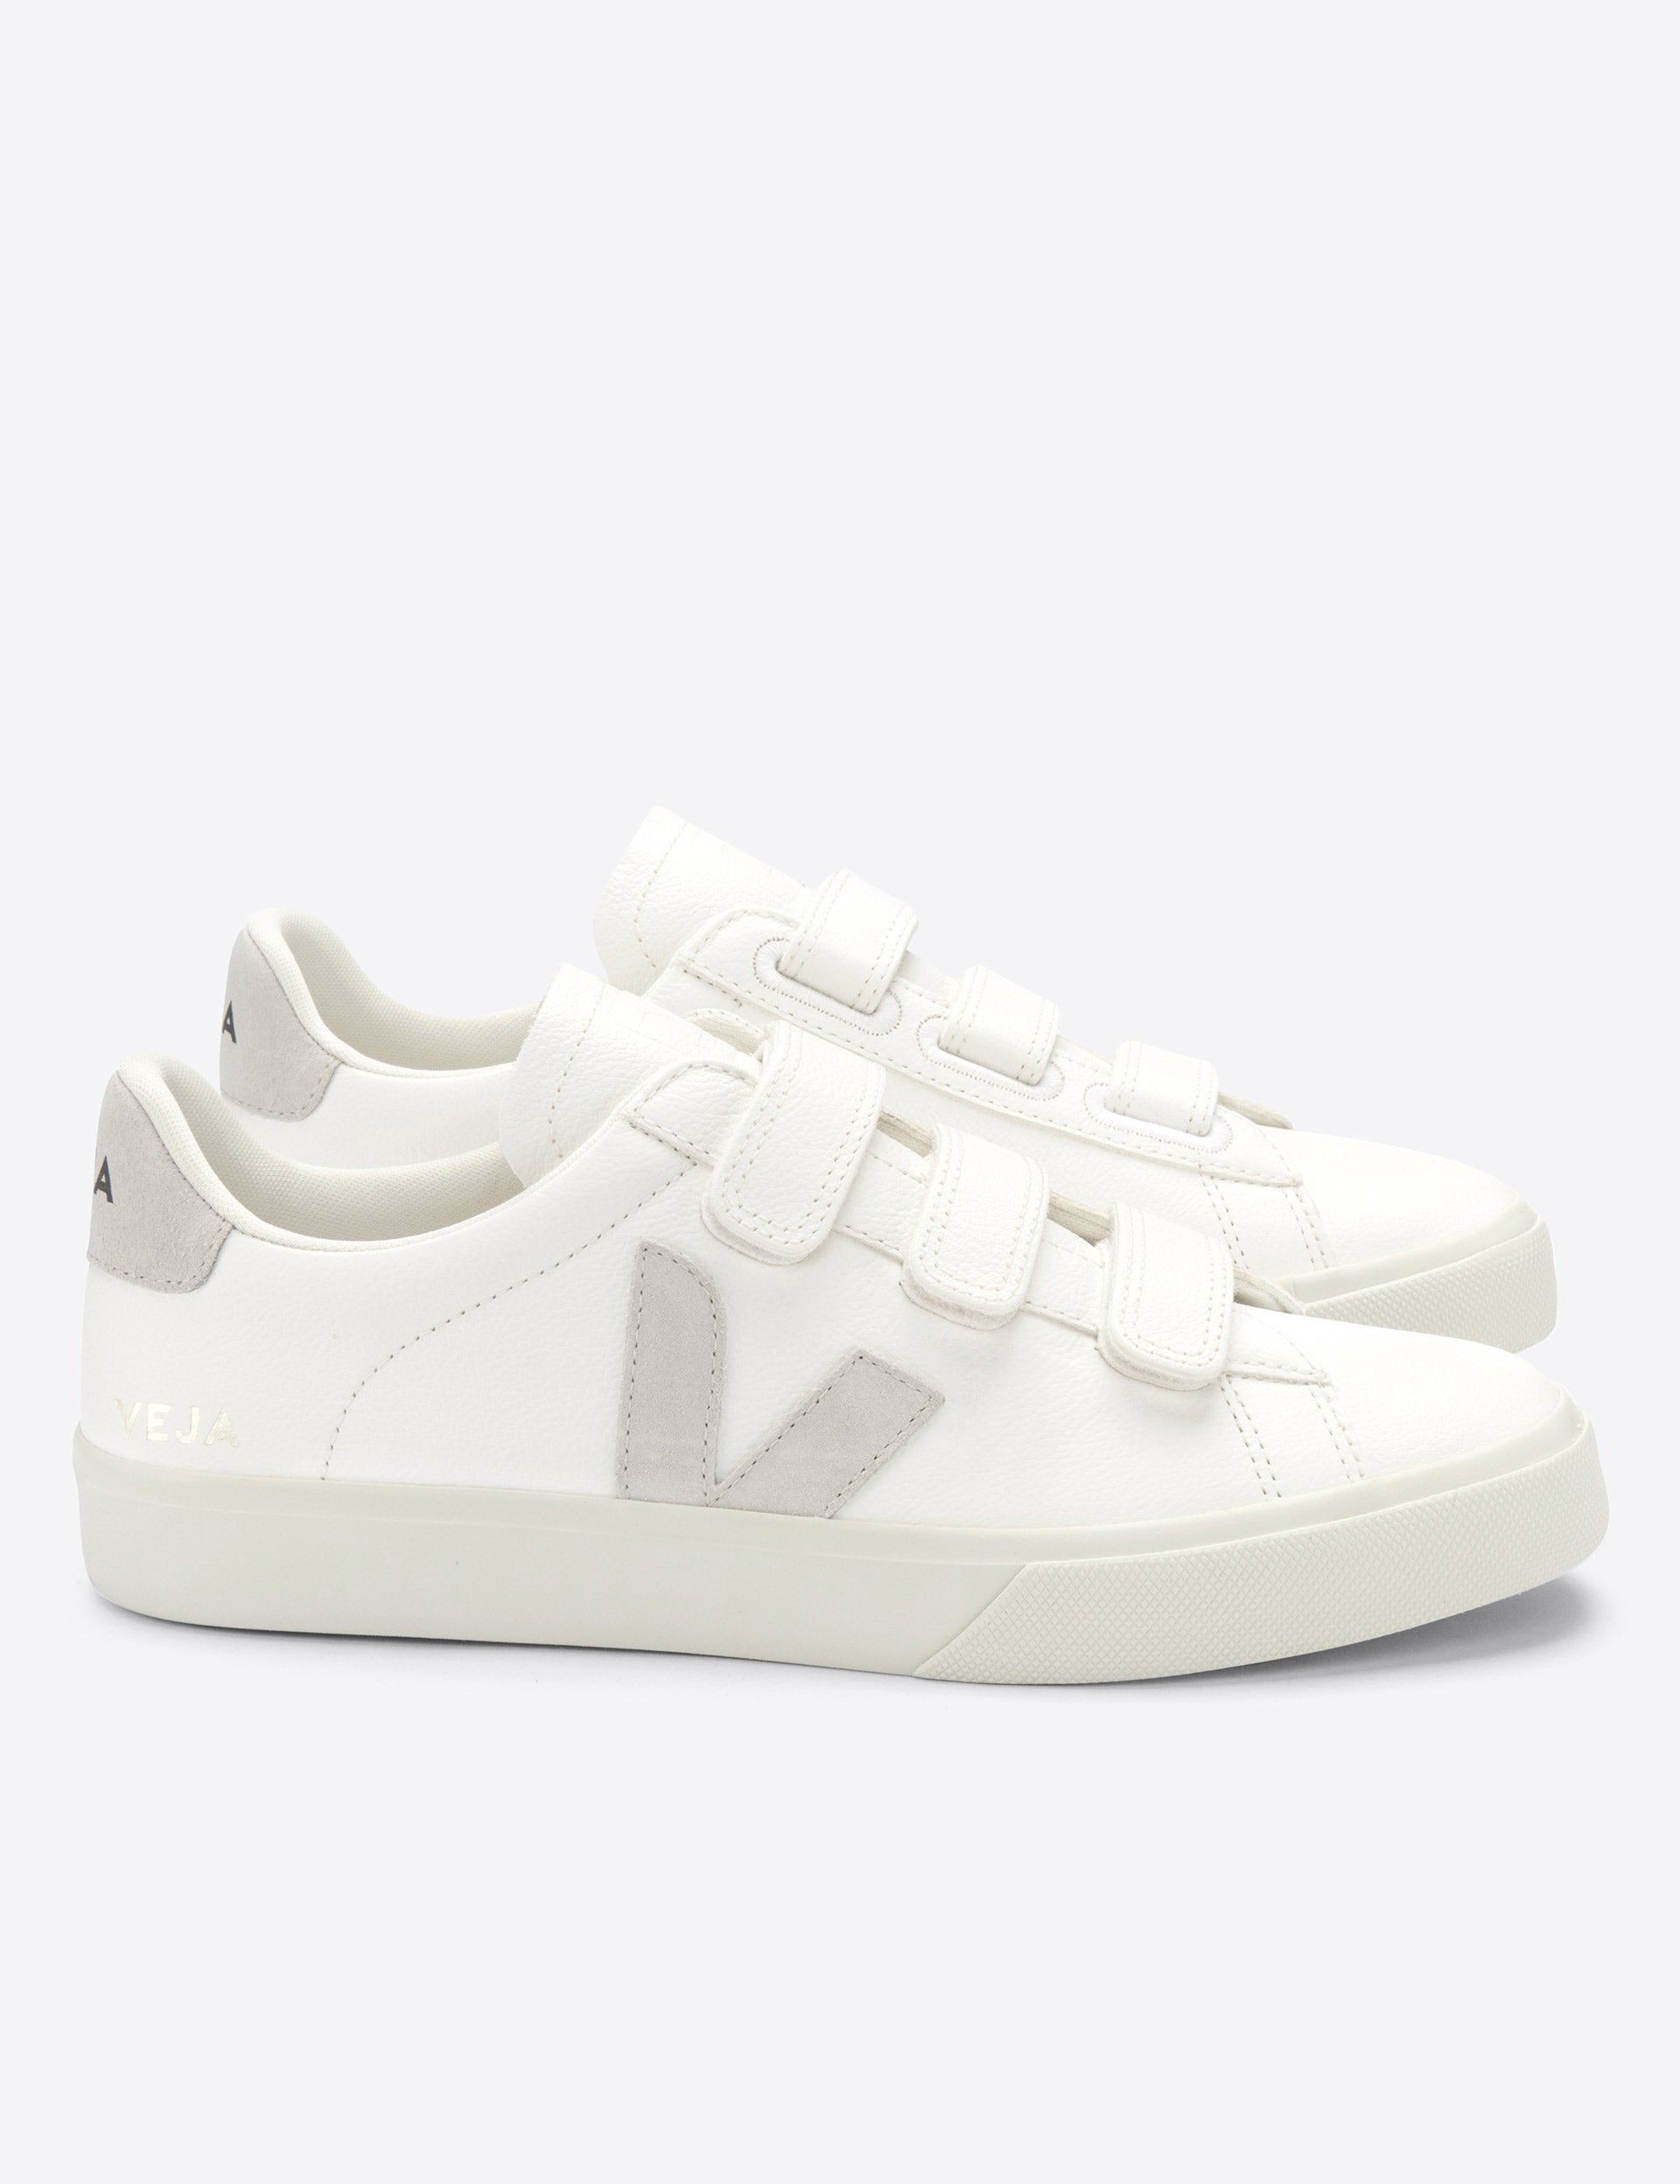 Veja | Recife Leather Trainers - White Natural | The Sports Edit